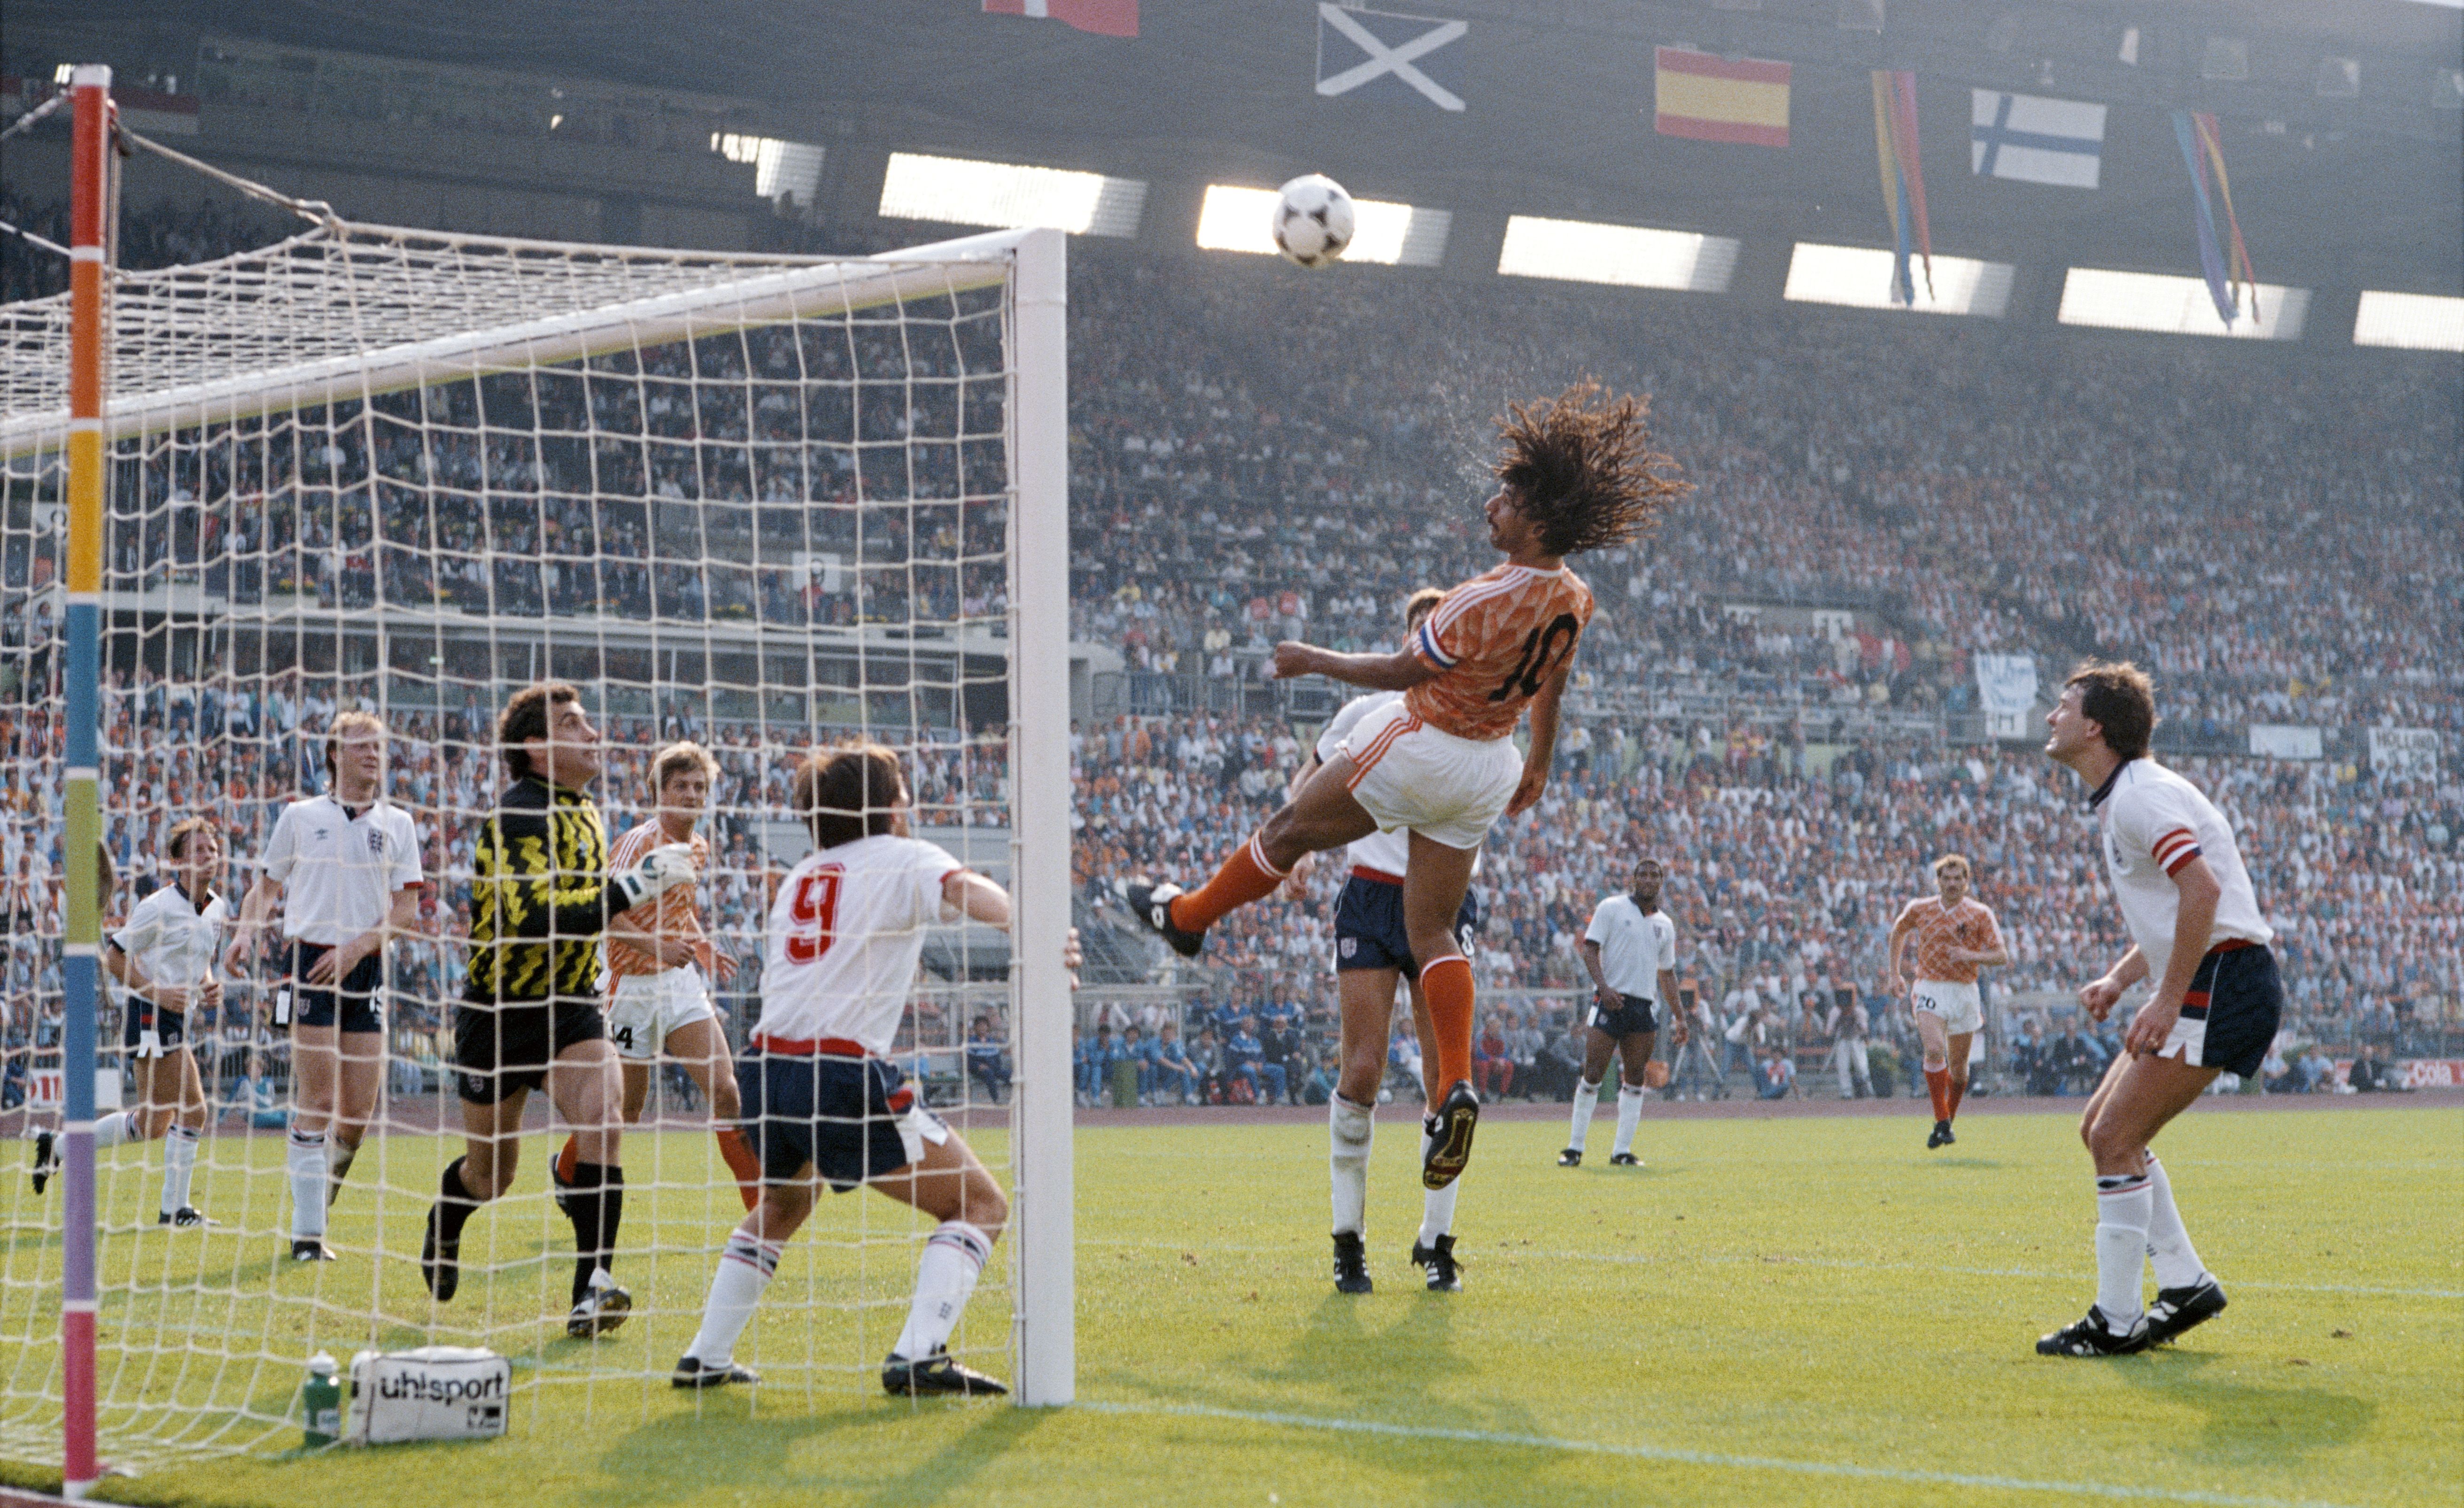 Ruud Gullit of Holland heads towards goal watched by Peter Shilton, Peter Beardsley (9) and Bryan Robson (r) during the European Championship match against England